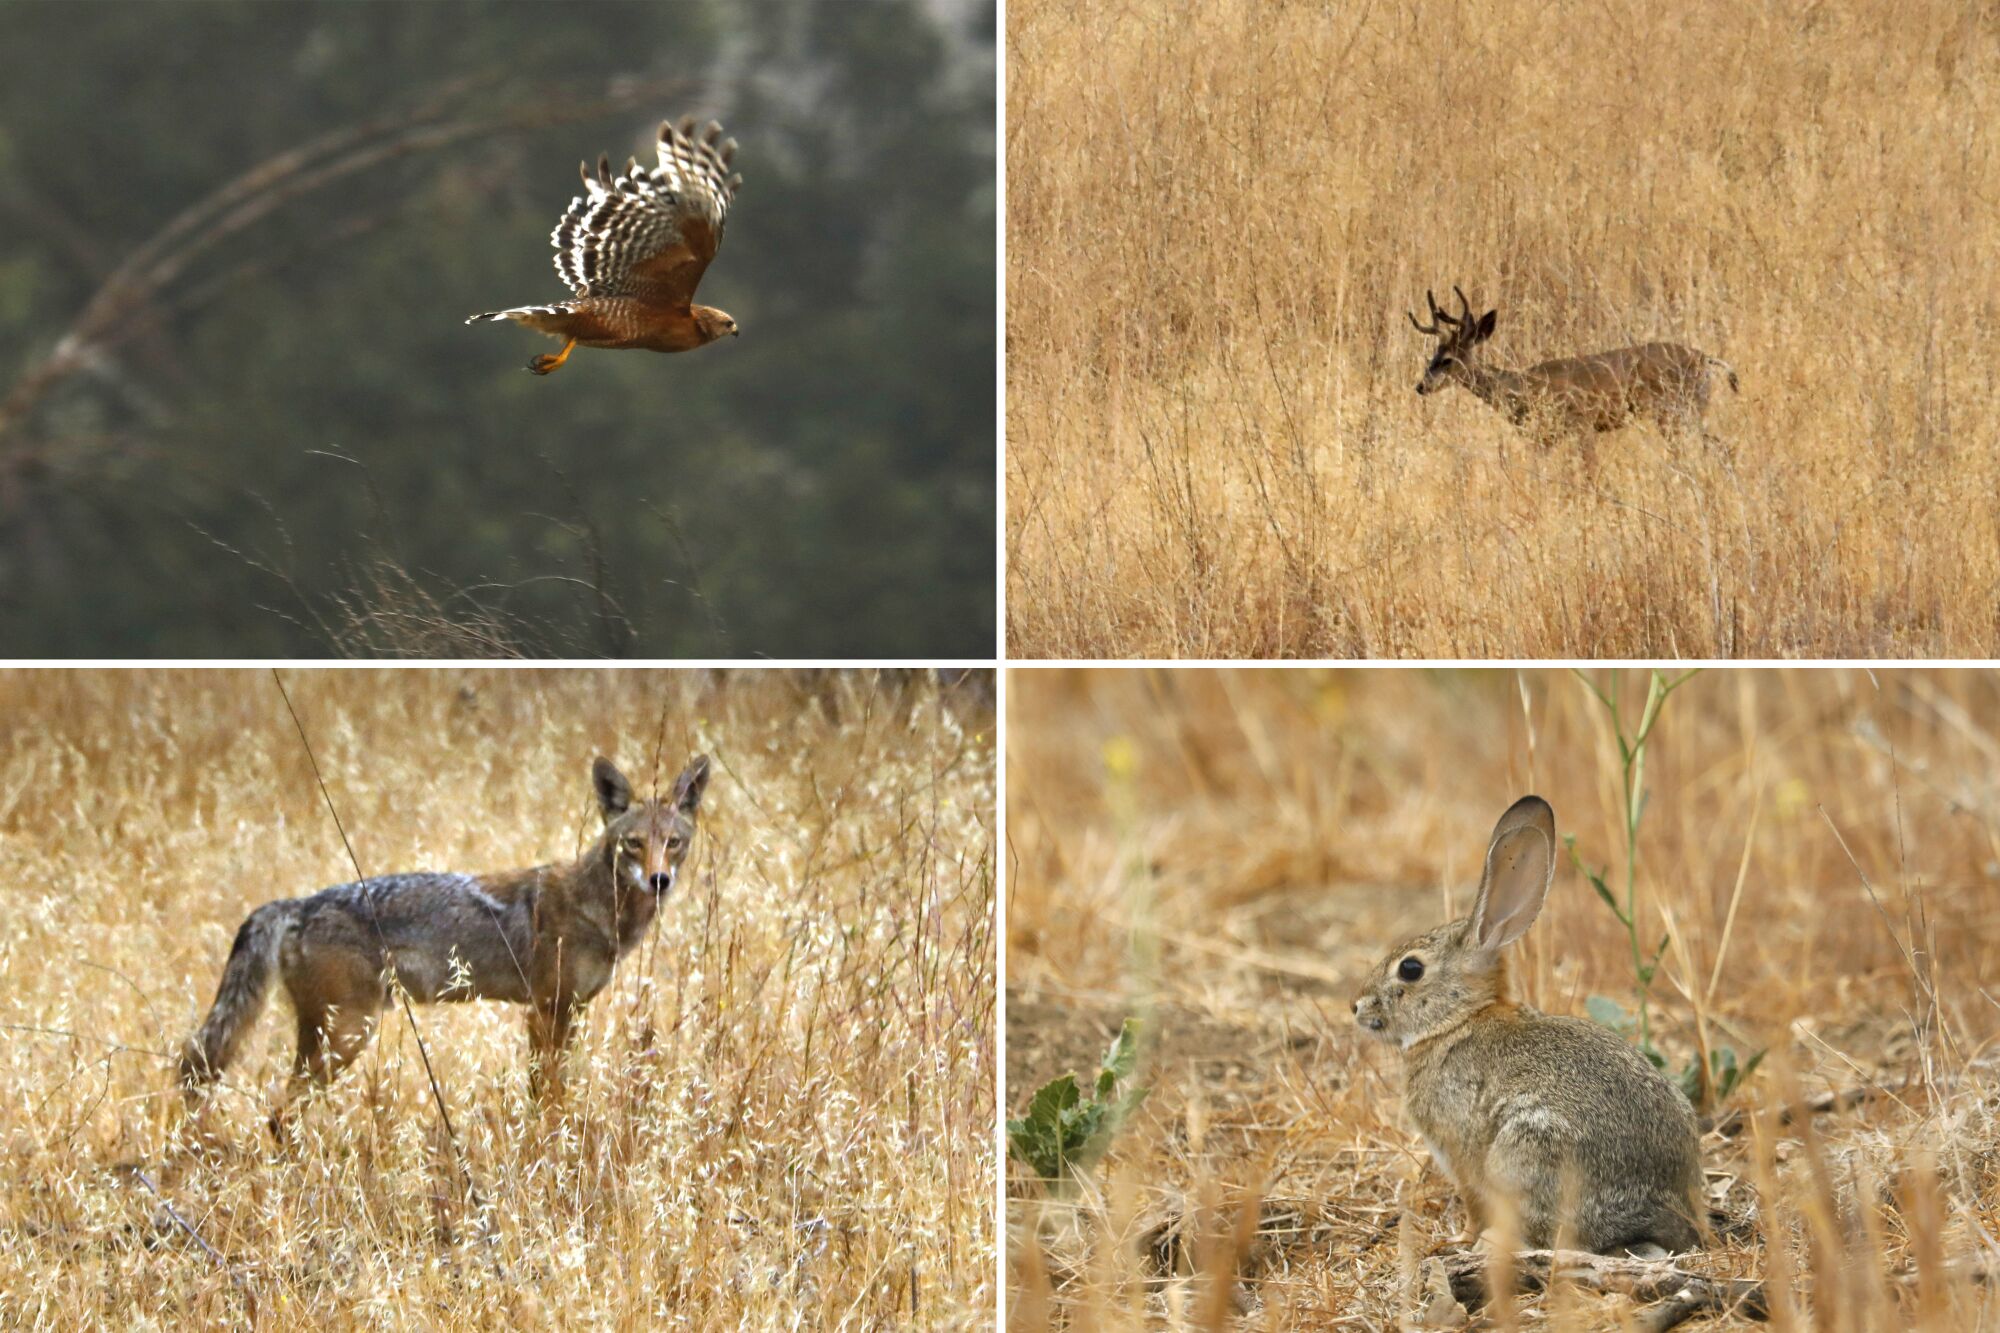 There is an abundance of wildlife in Liberty Canyon, including hawks, deer, coyotes and rabbits.